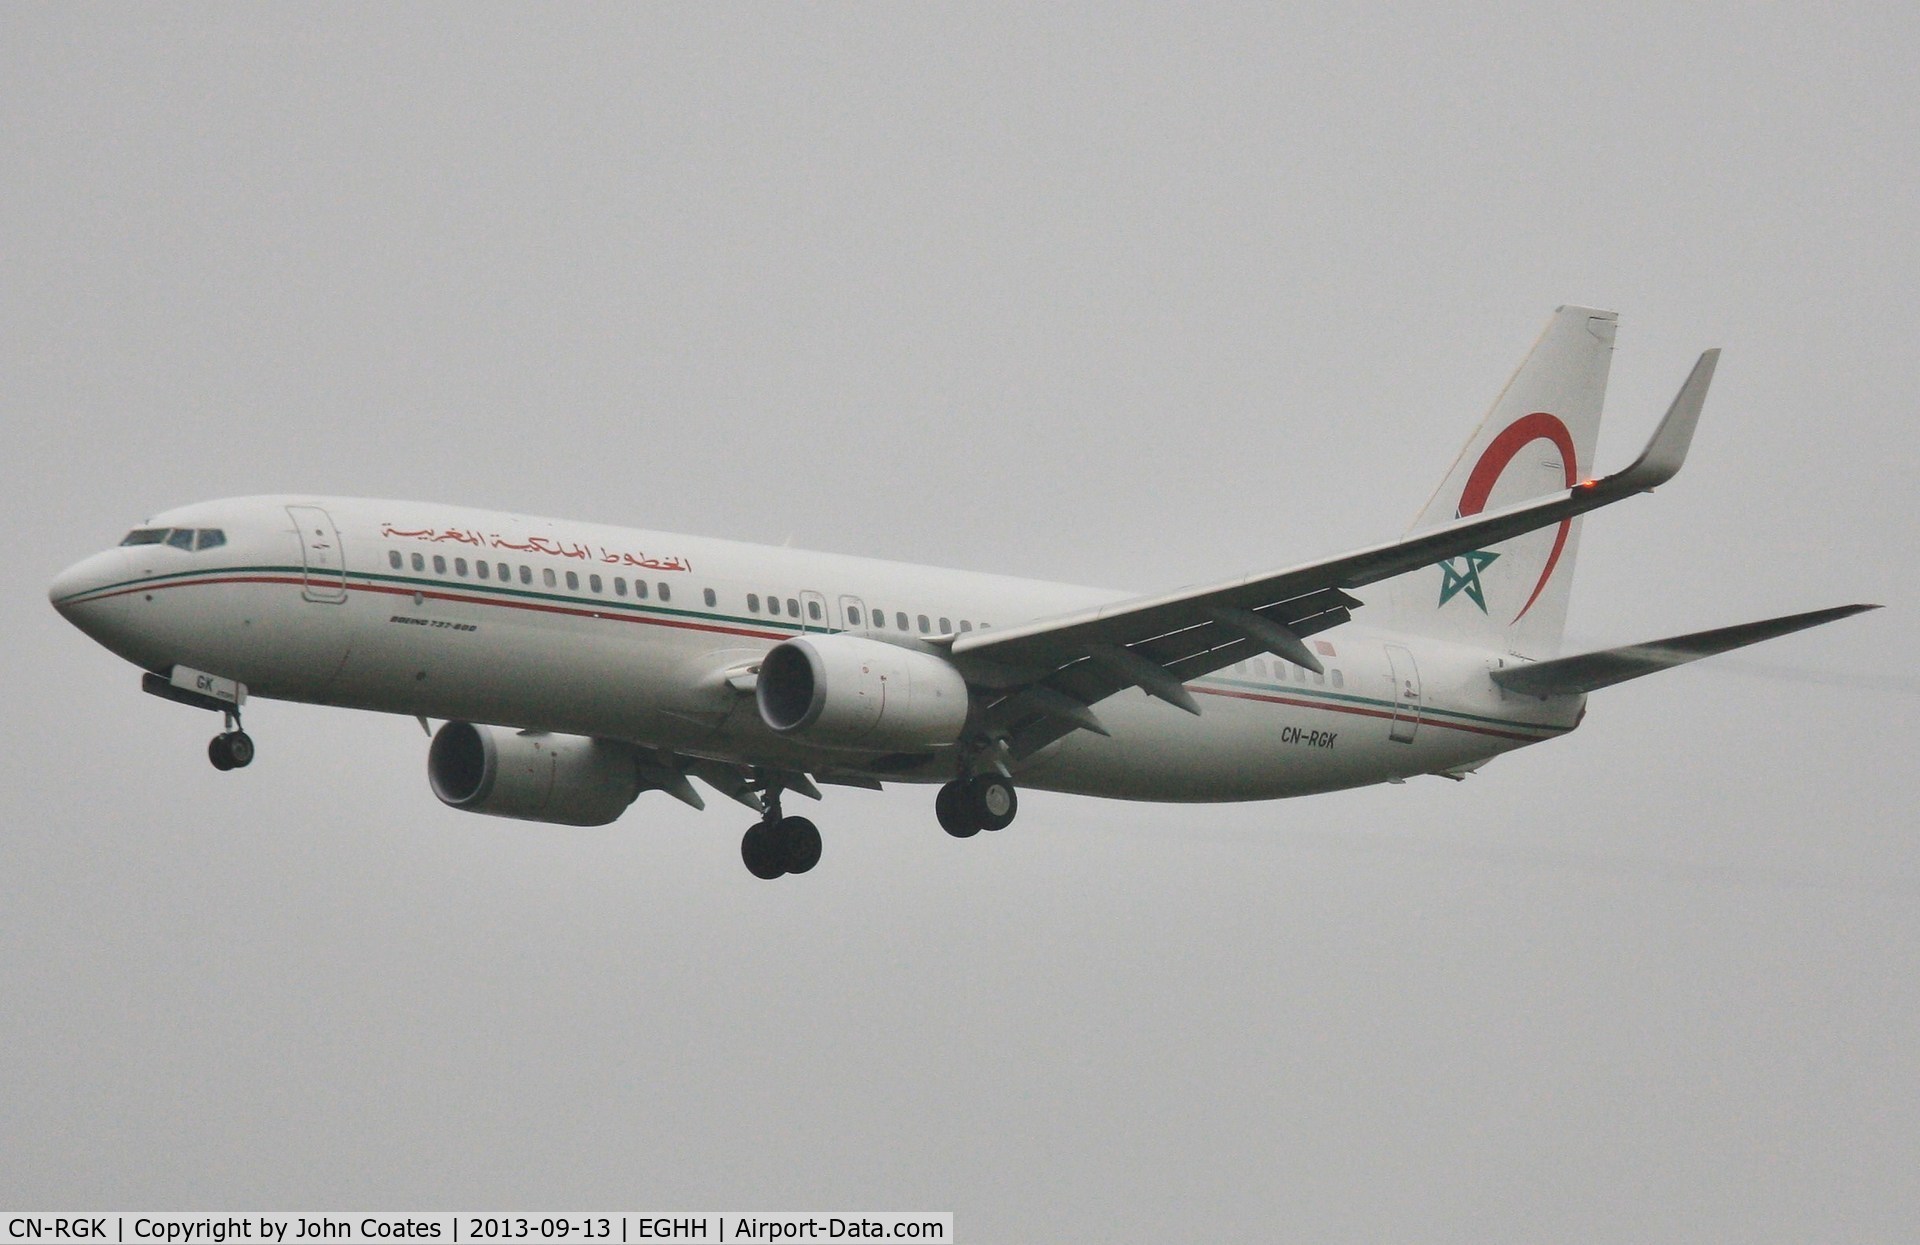 CN-RGK, 2012 Boeing 737-8B6 C/N 33073, Finals to 27L in heavy drizzle.